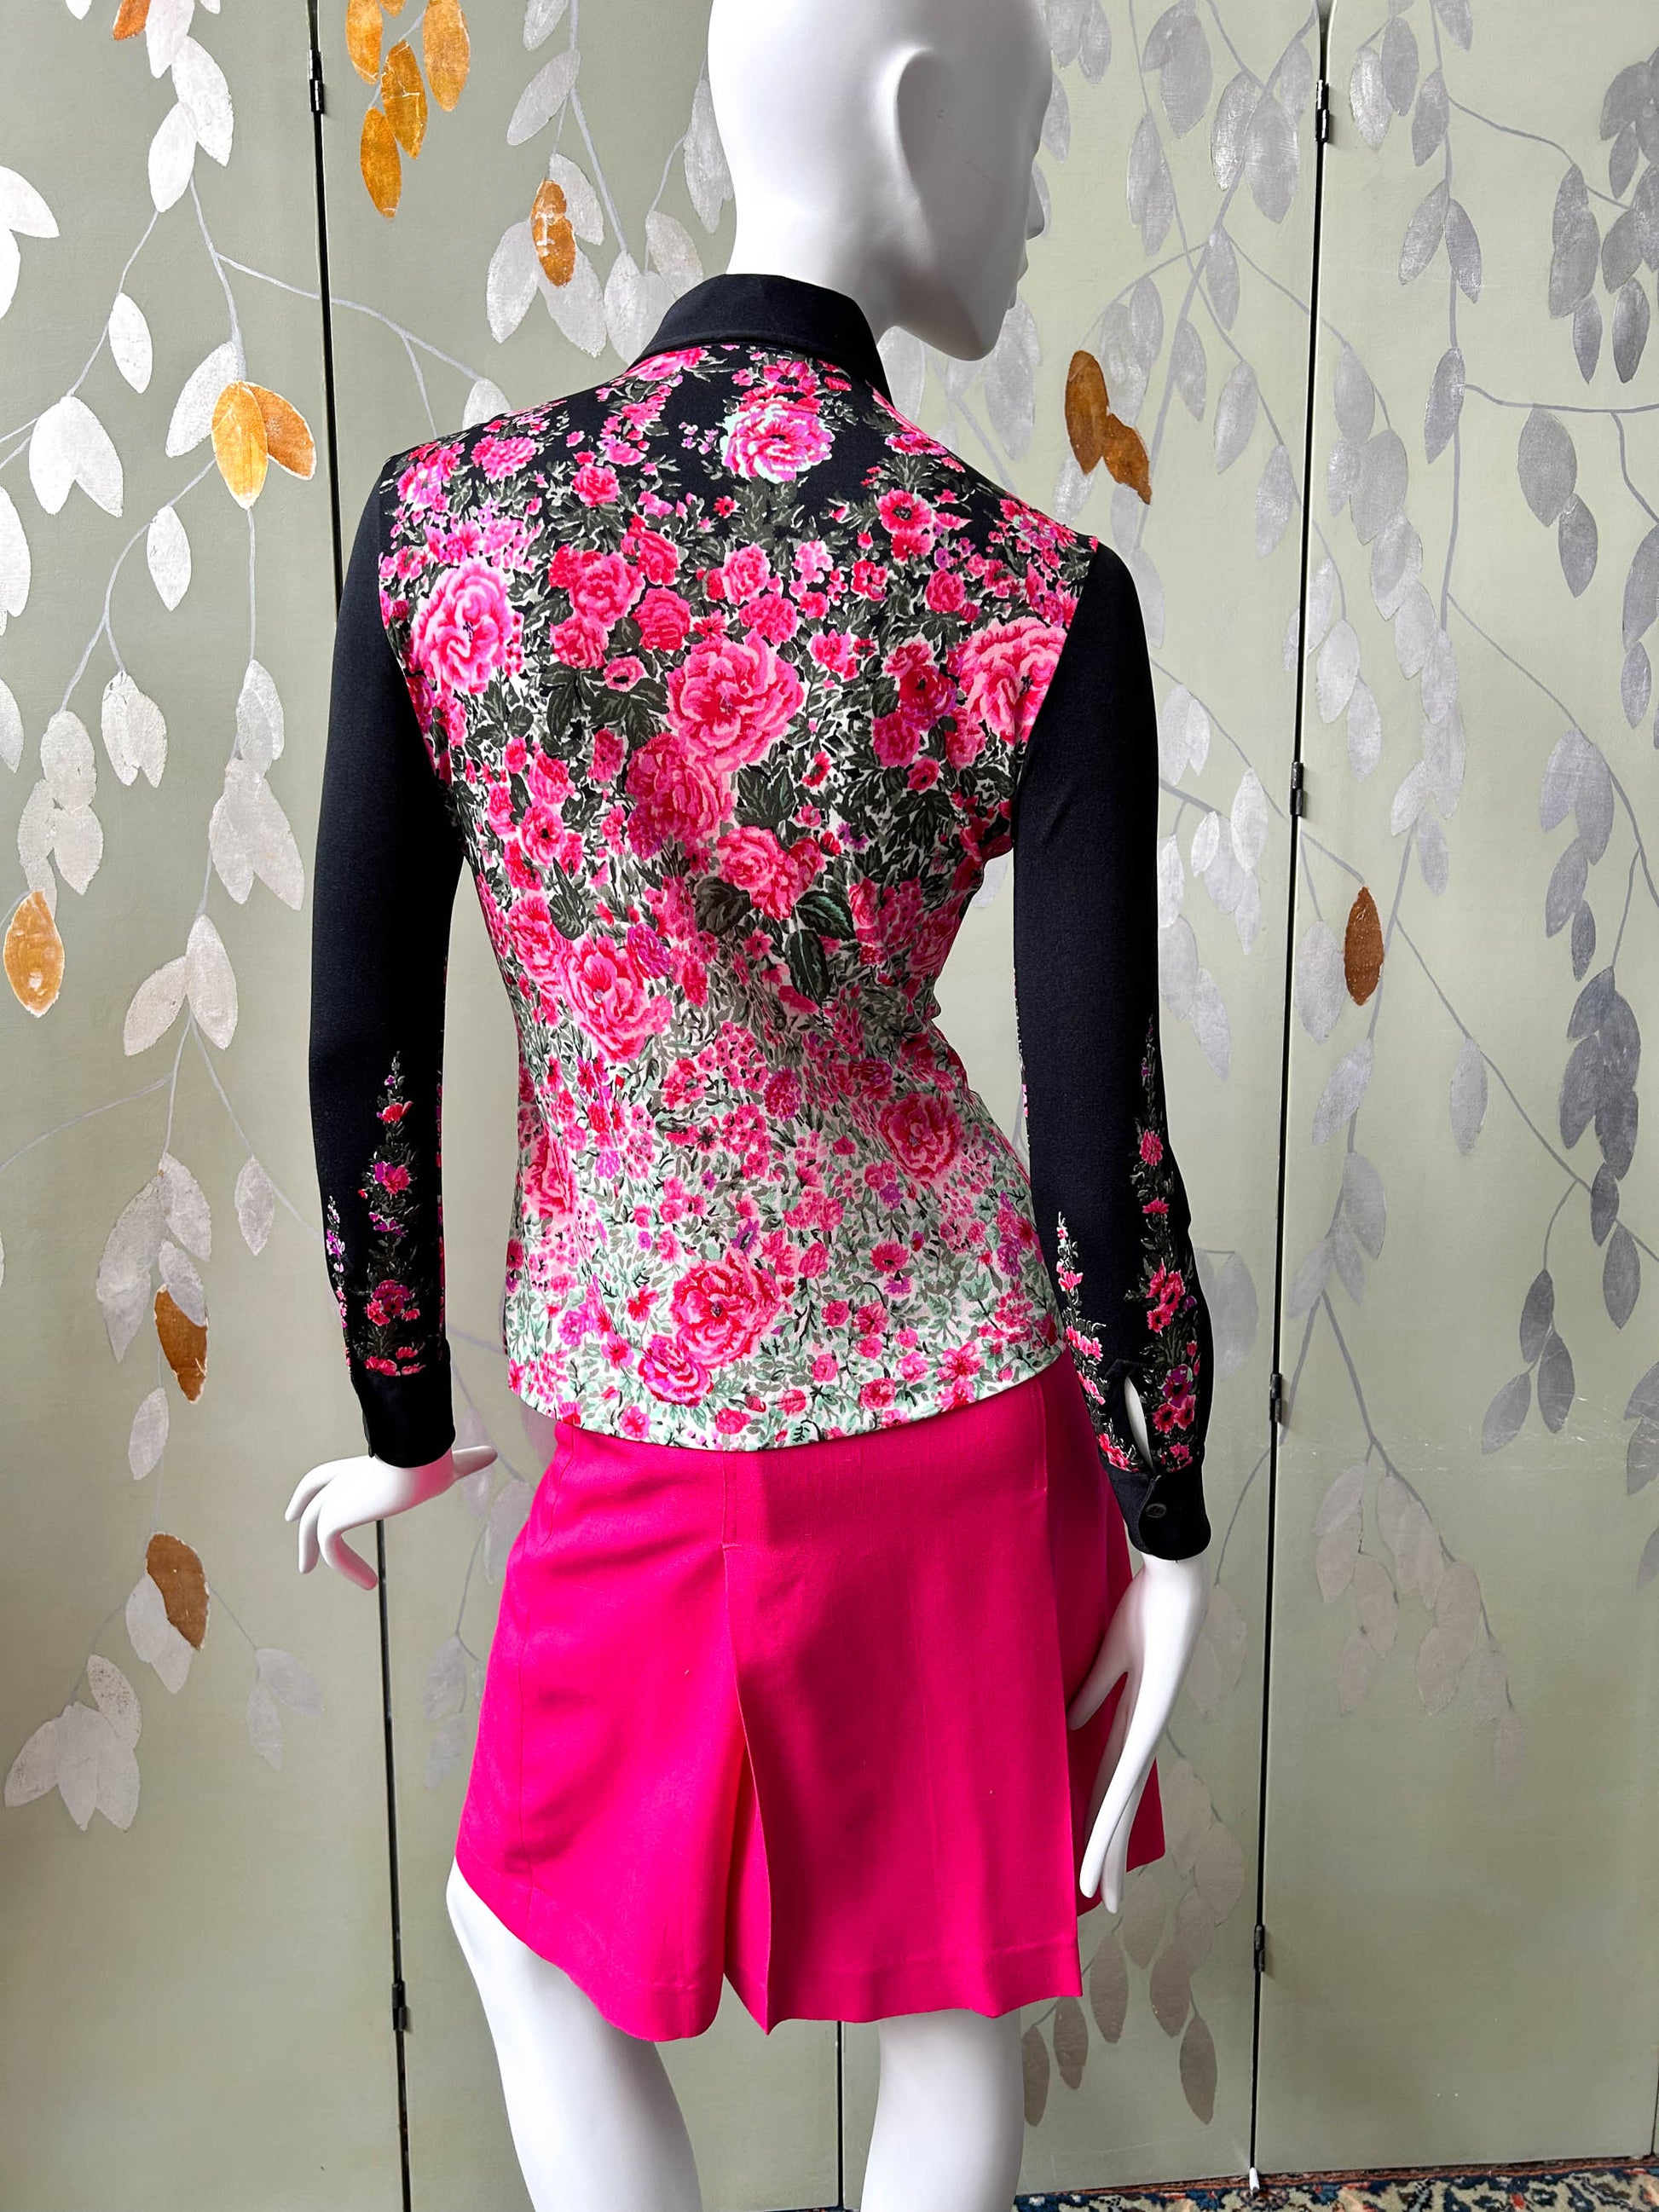 1960s 70s silk jerseyl floral collared button up shirt by Fashion Magazine made in Italy, Hot pink floral print against black vintage blouse